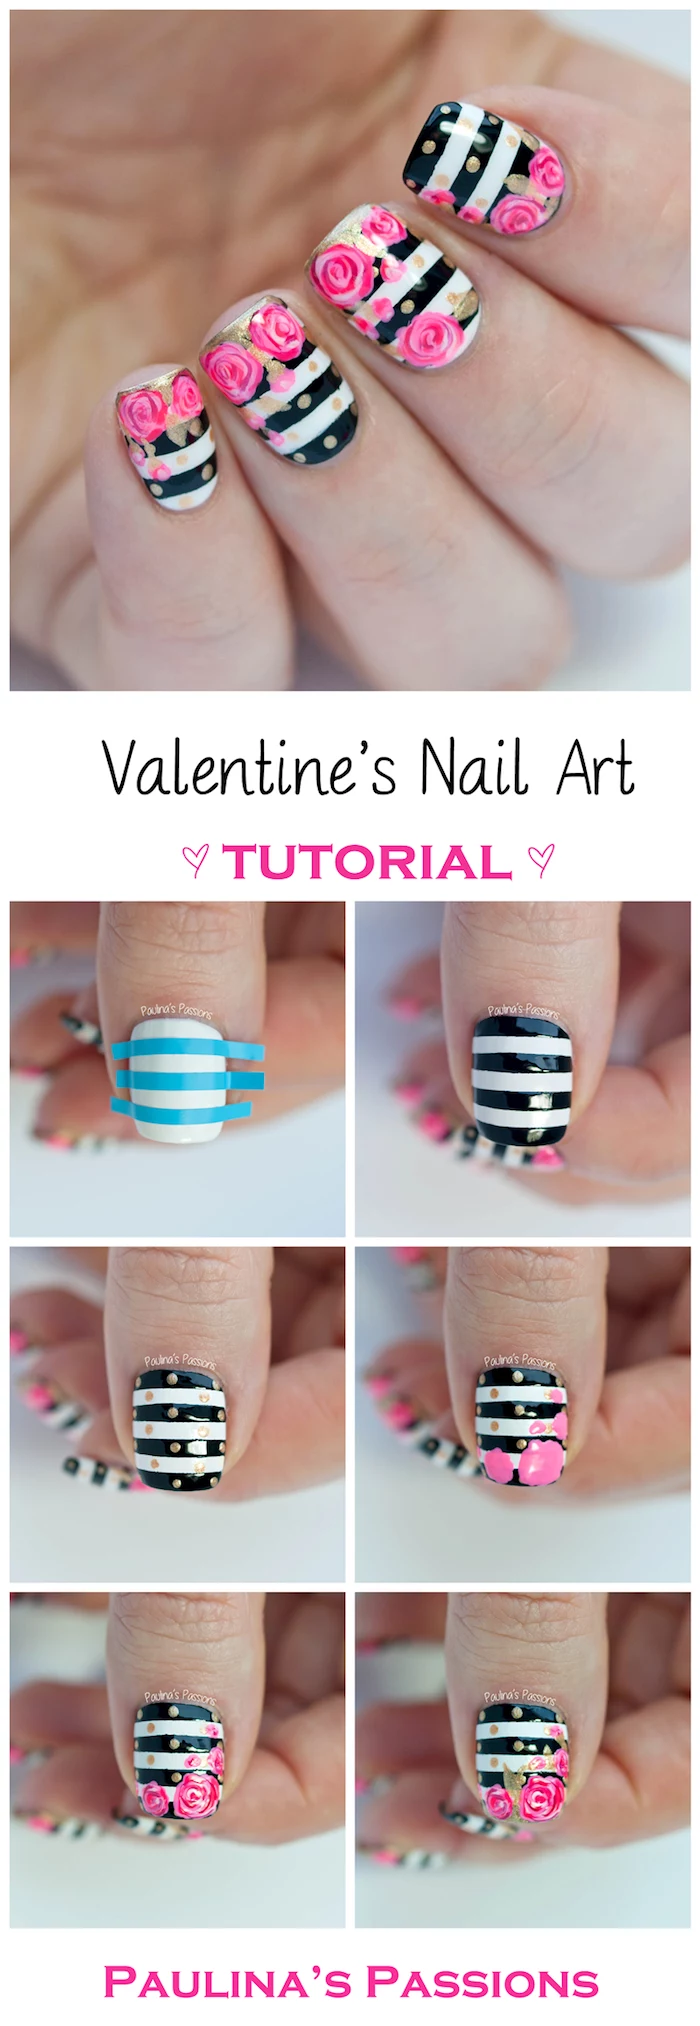 black and white striped nail polish valentines day nails coffin shape pink roses decorations step by step diy tutorial